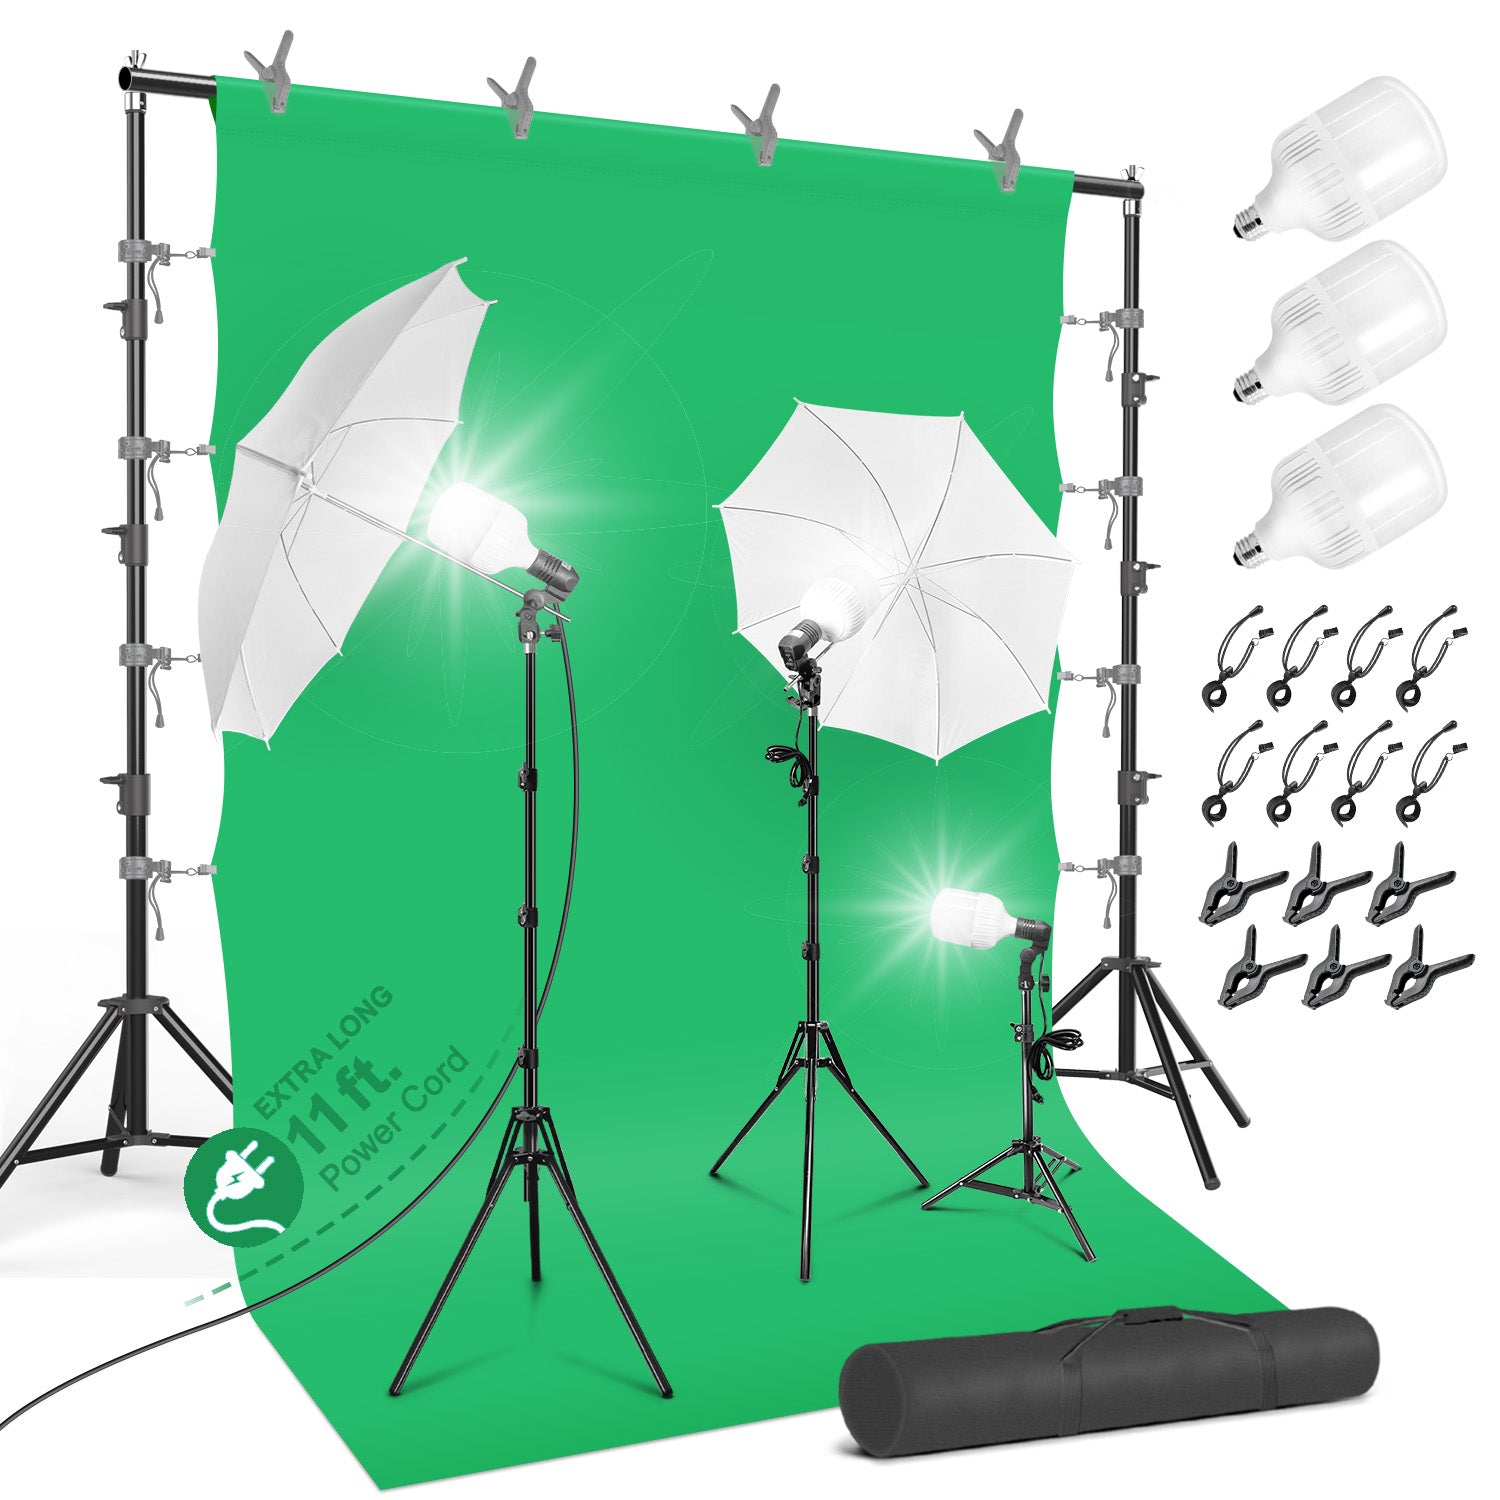 10 x 9.6 ft. Heavy Duty Backdrop Stand / 10 x 20 ft. Green